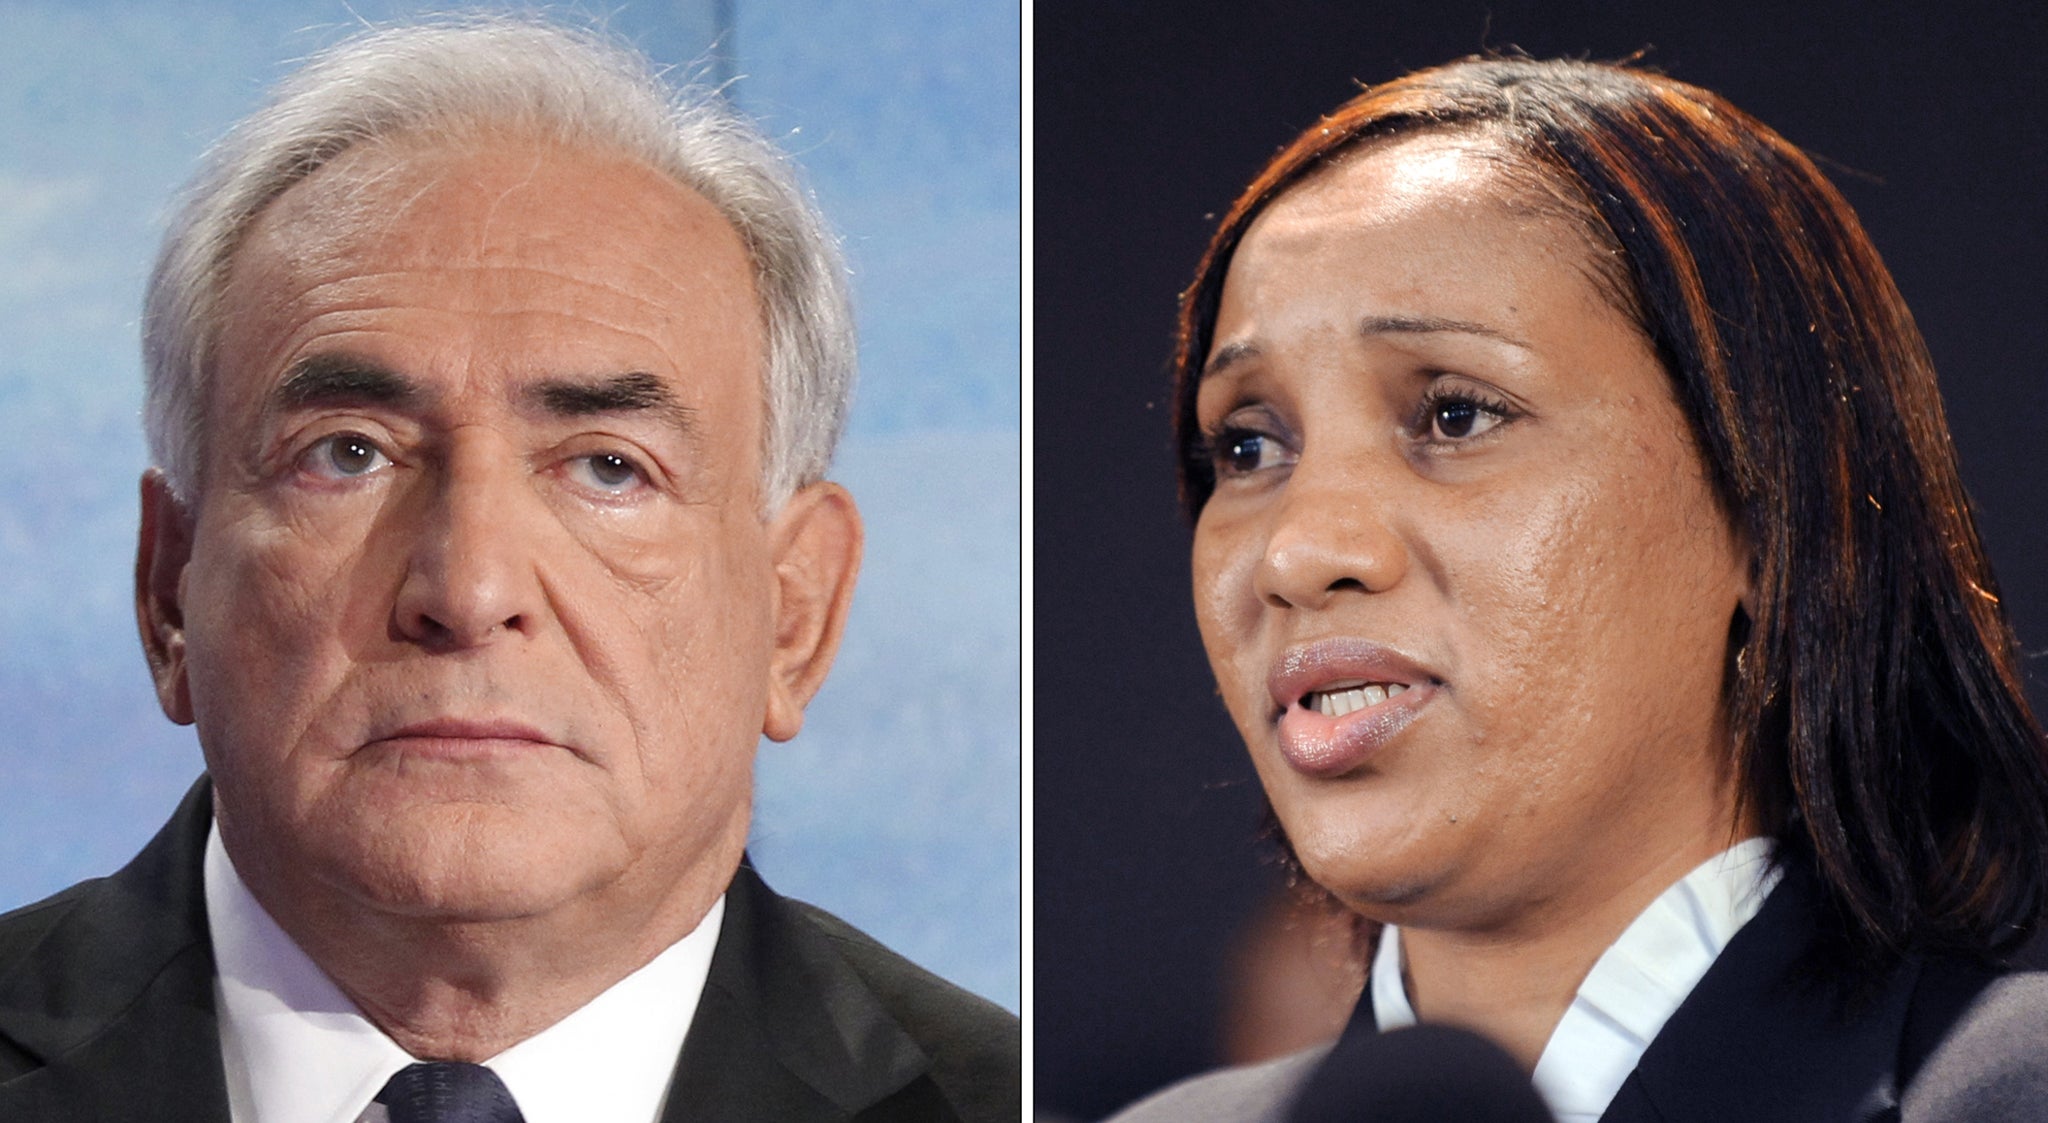 It had been rumoured that Dominique Strauss-Kahn and housekeeper Nafissatou Diallo made an as-yet-unsigned agreement within recent days